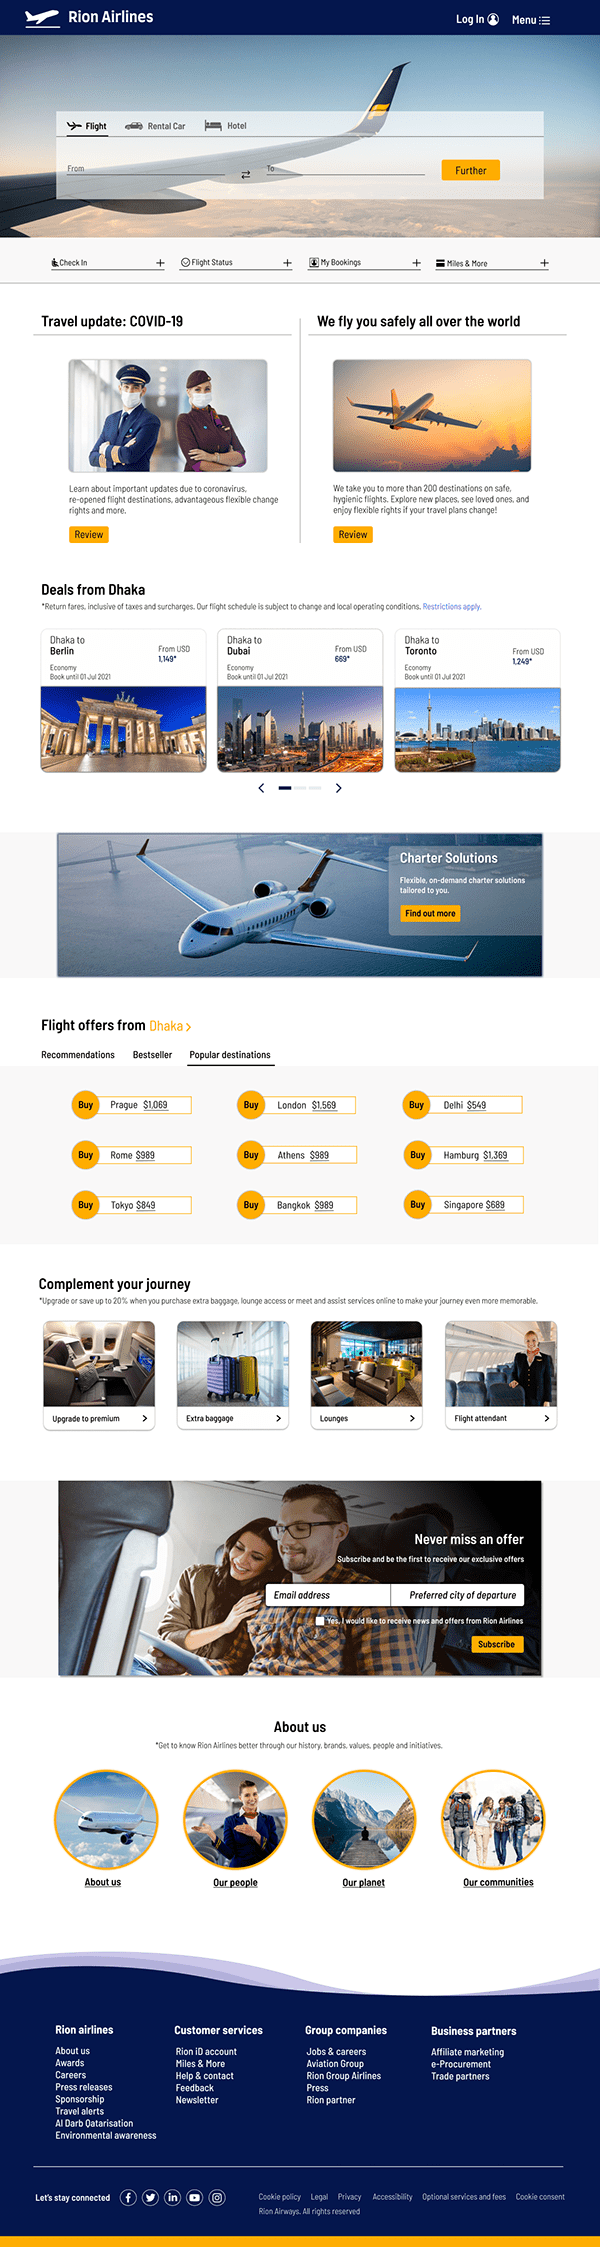 Landing Page for Airlines